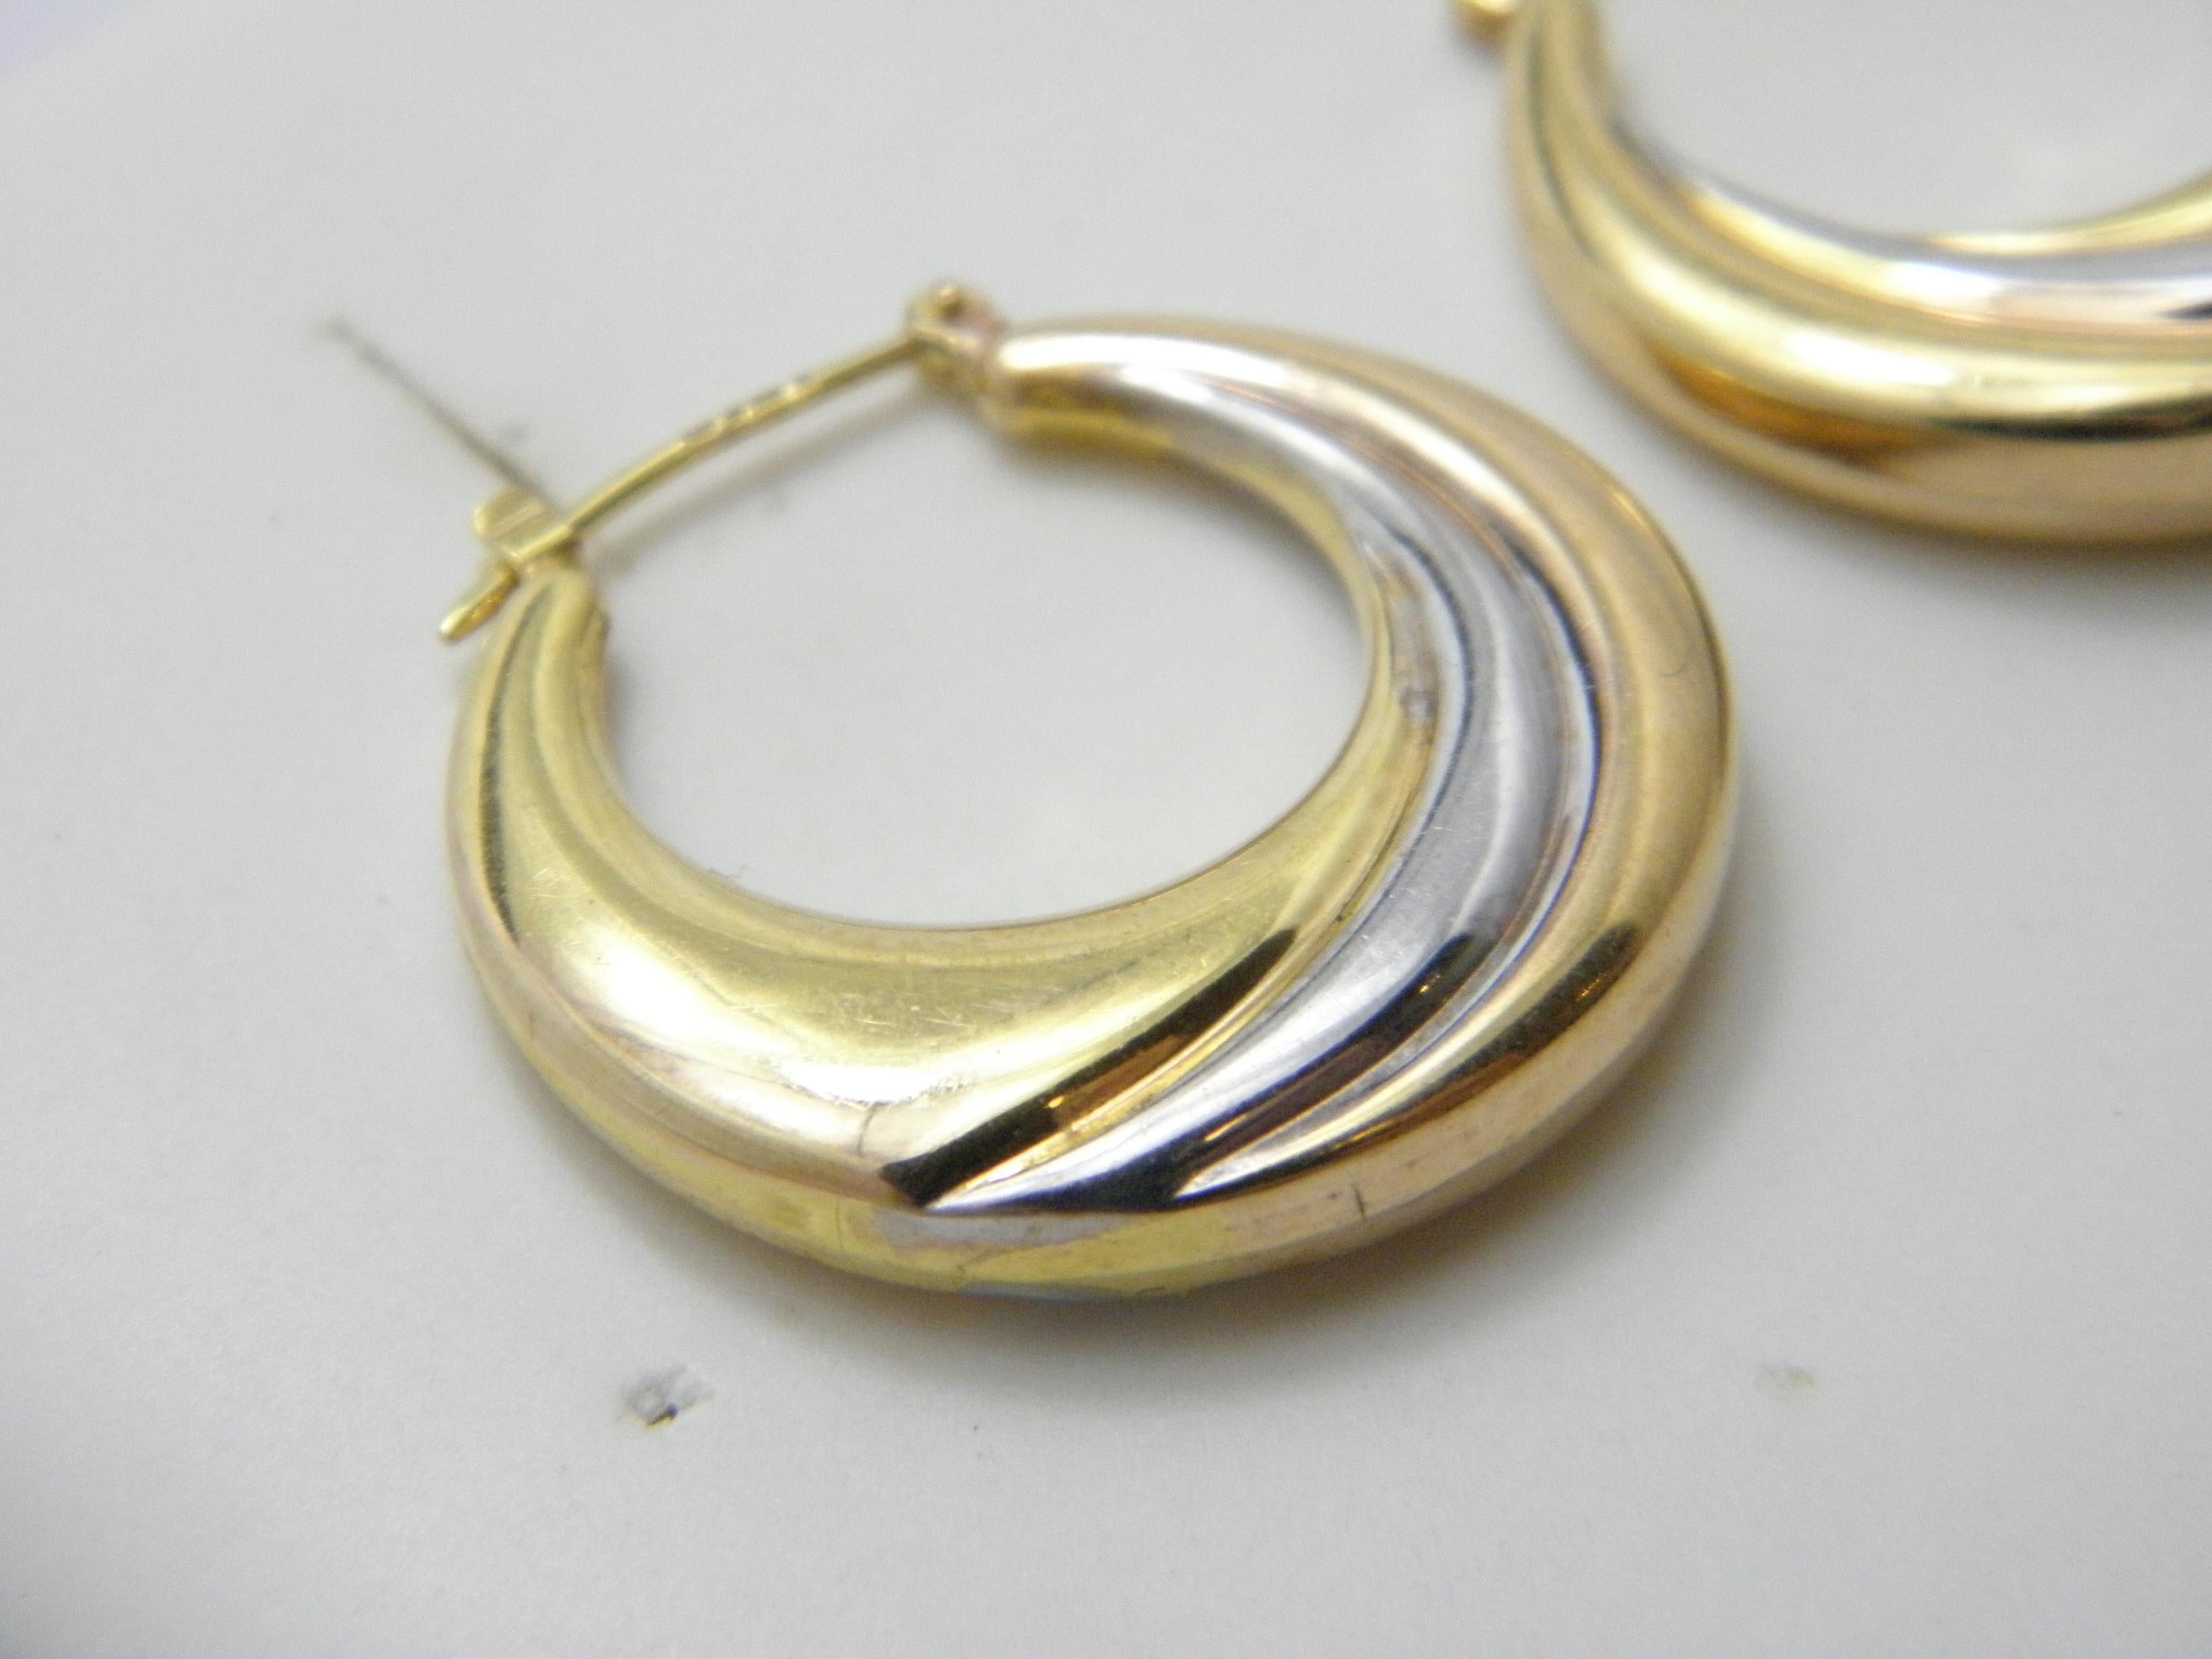 Vintage 9ct Gold Large Hoop Dangle Earrings 3 Tone 375 Purity Huggie Creole In Good Condition For Sale In Camelford, GB